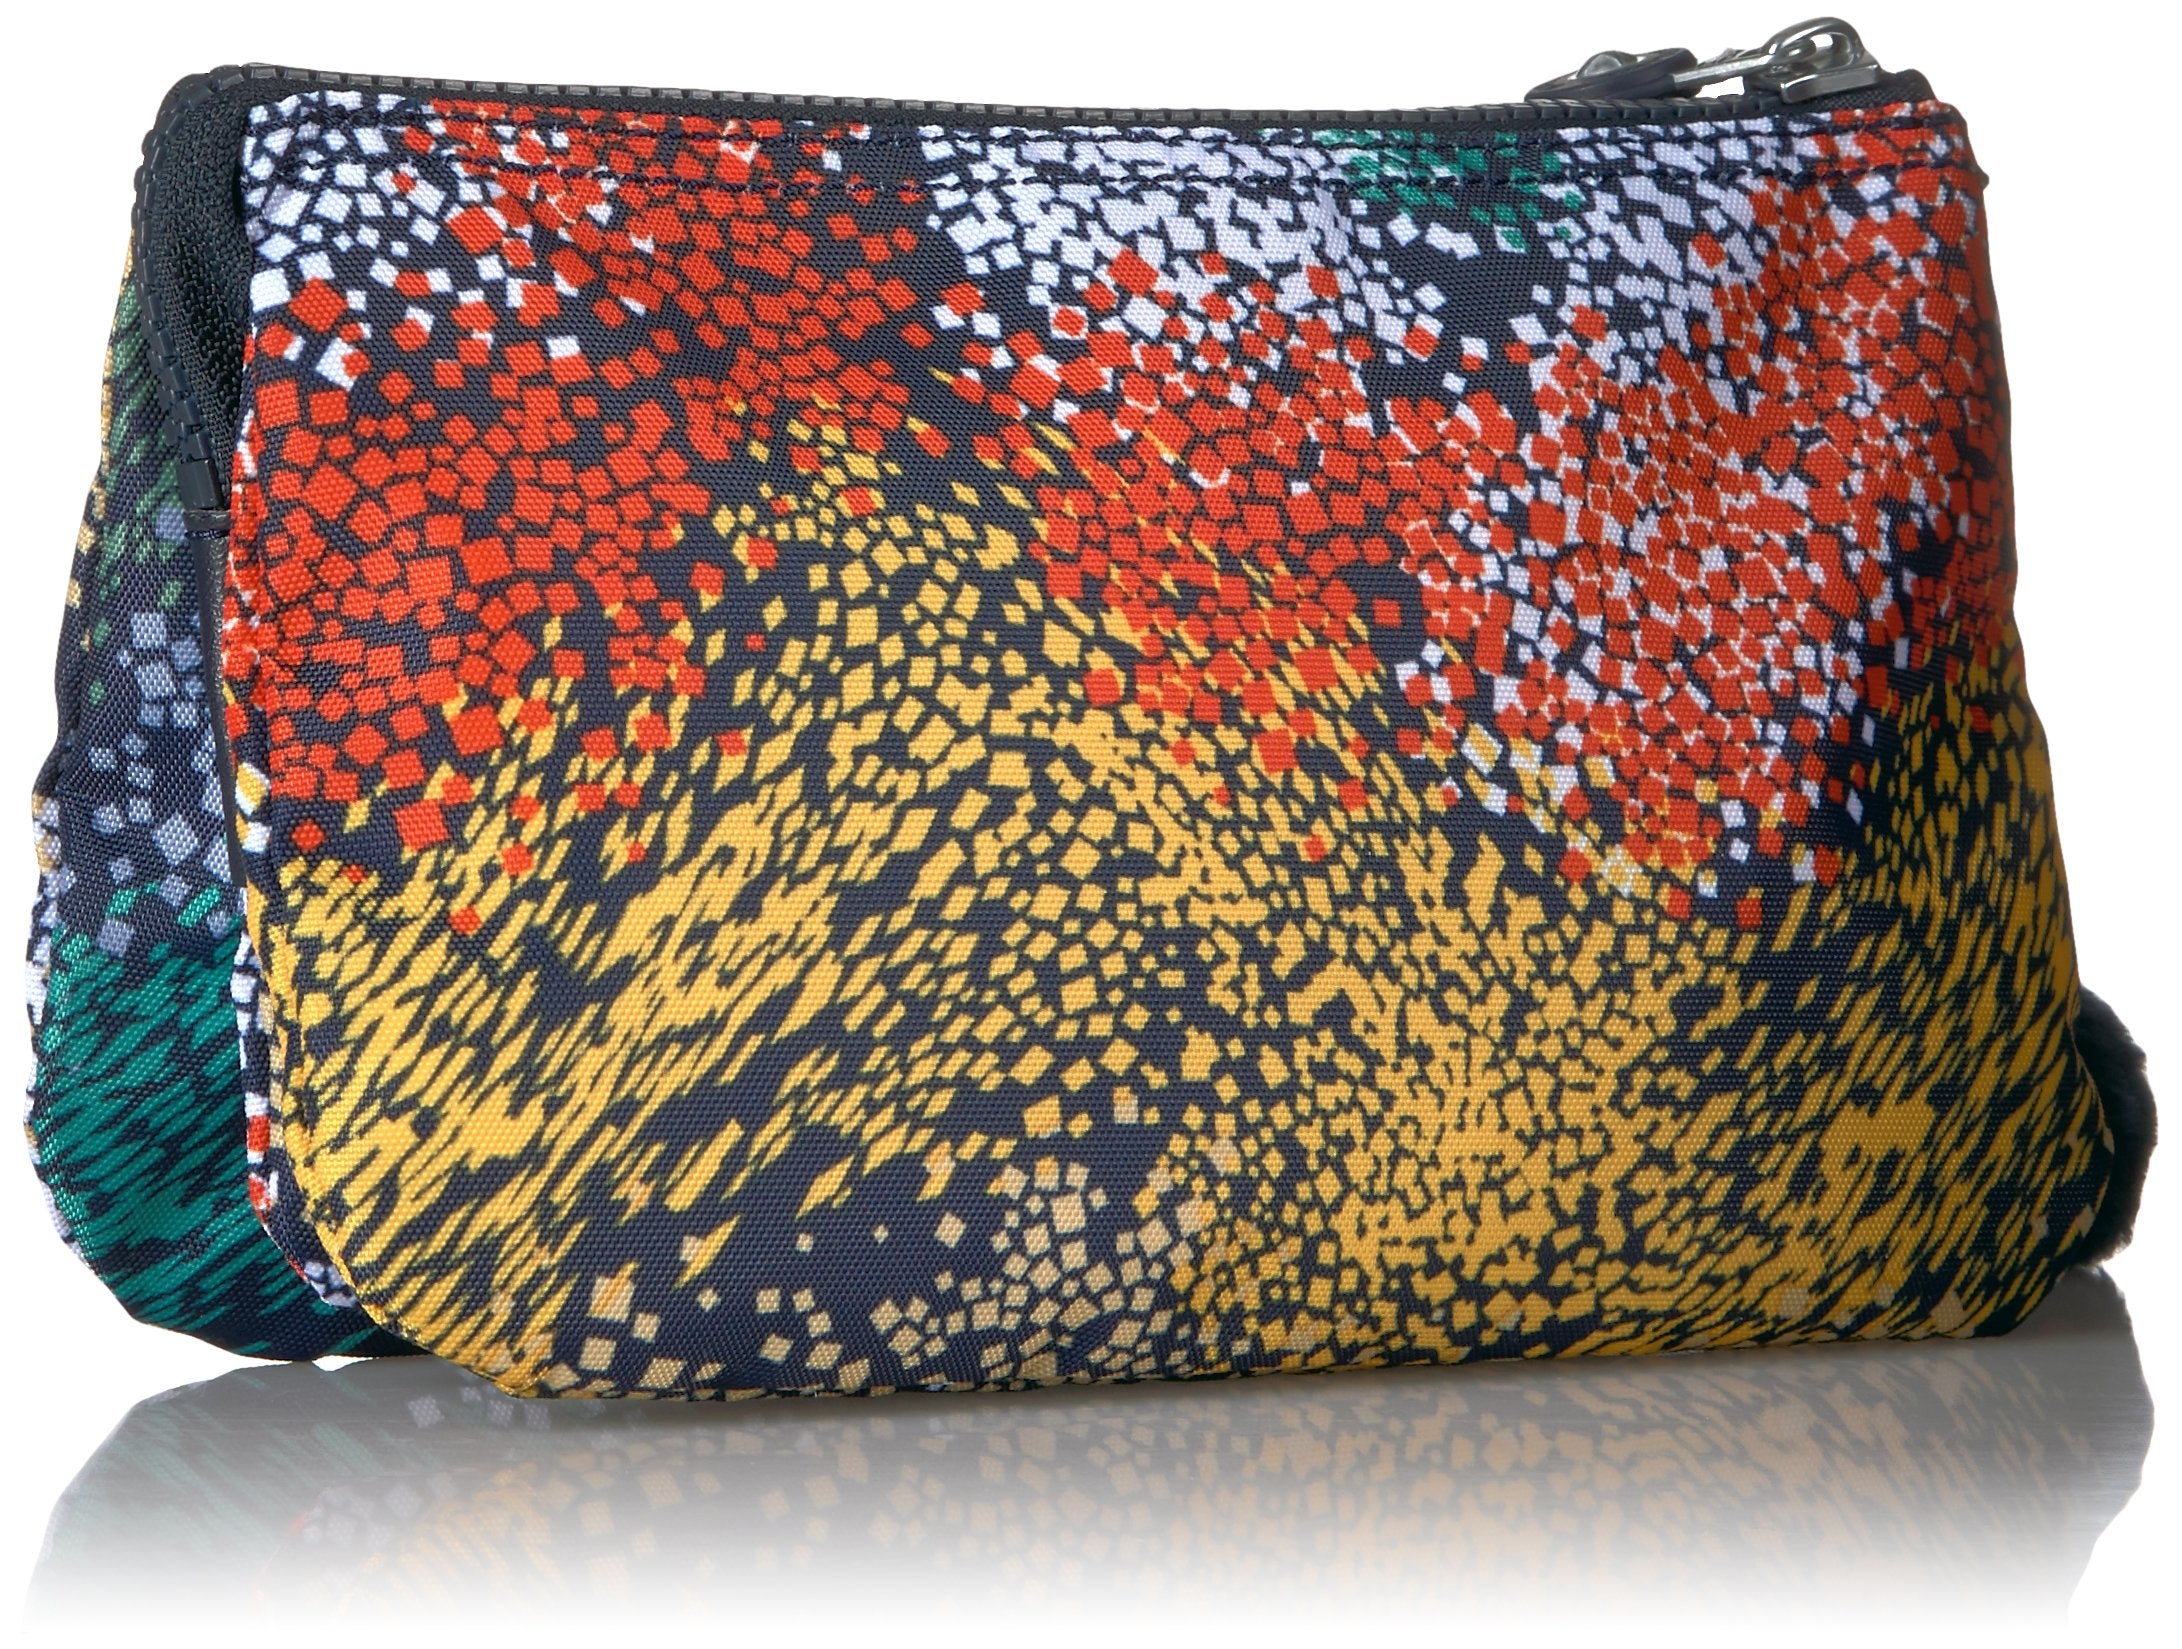 Kipling Creativity X-Large Pouch (Casual Flower)